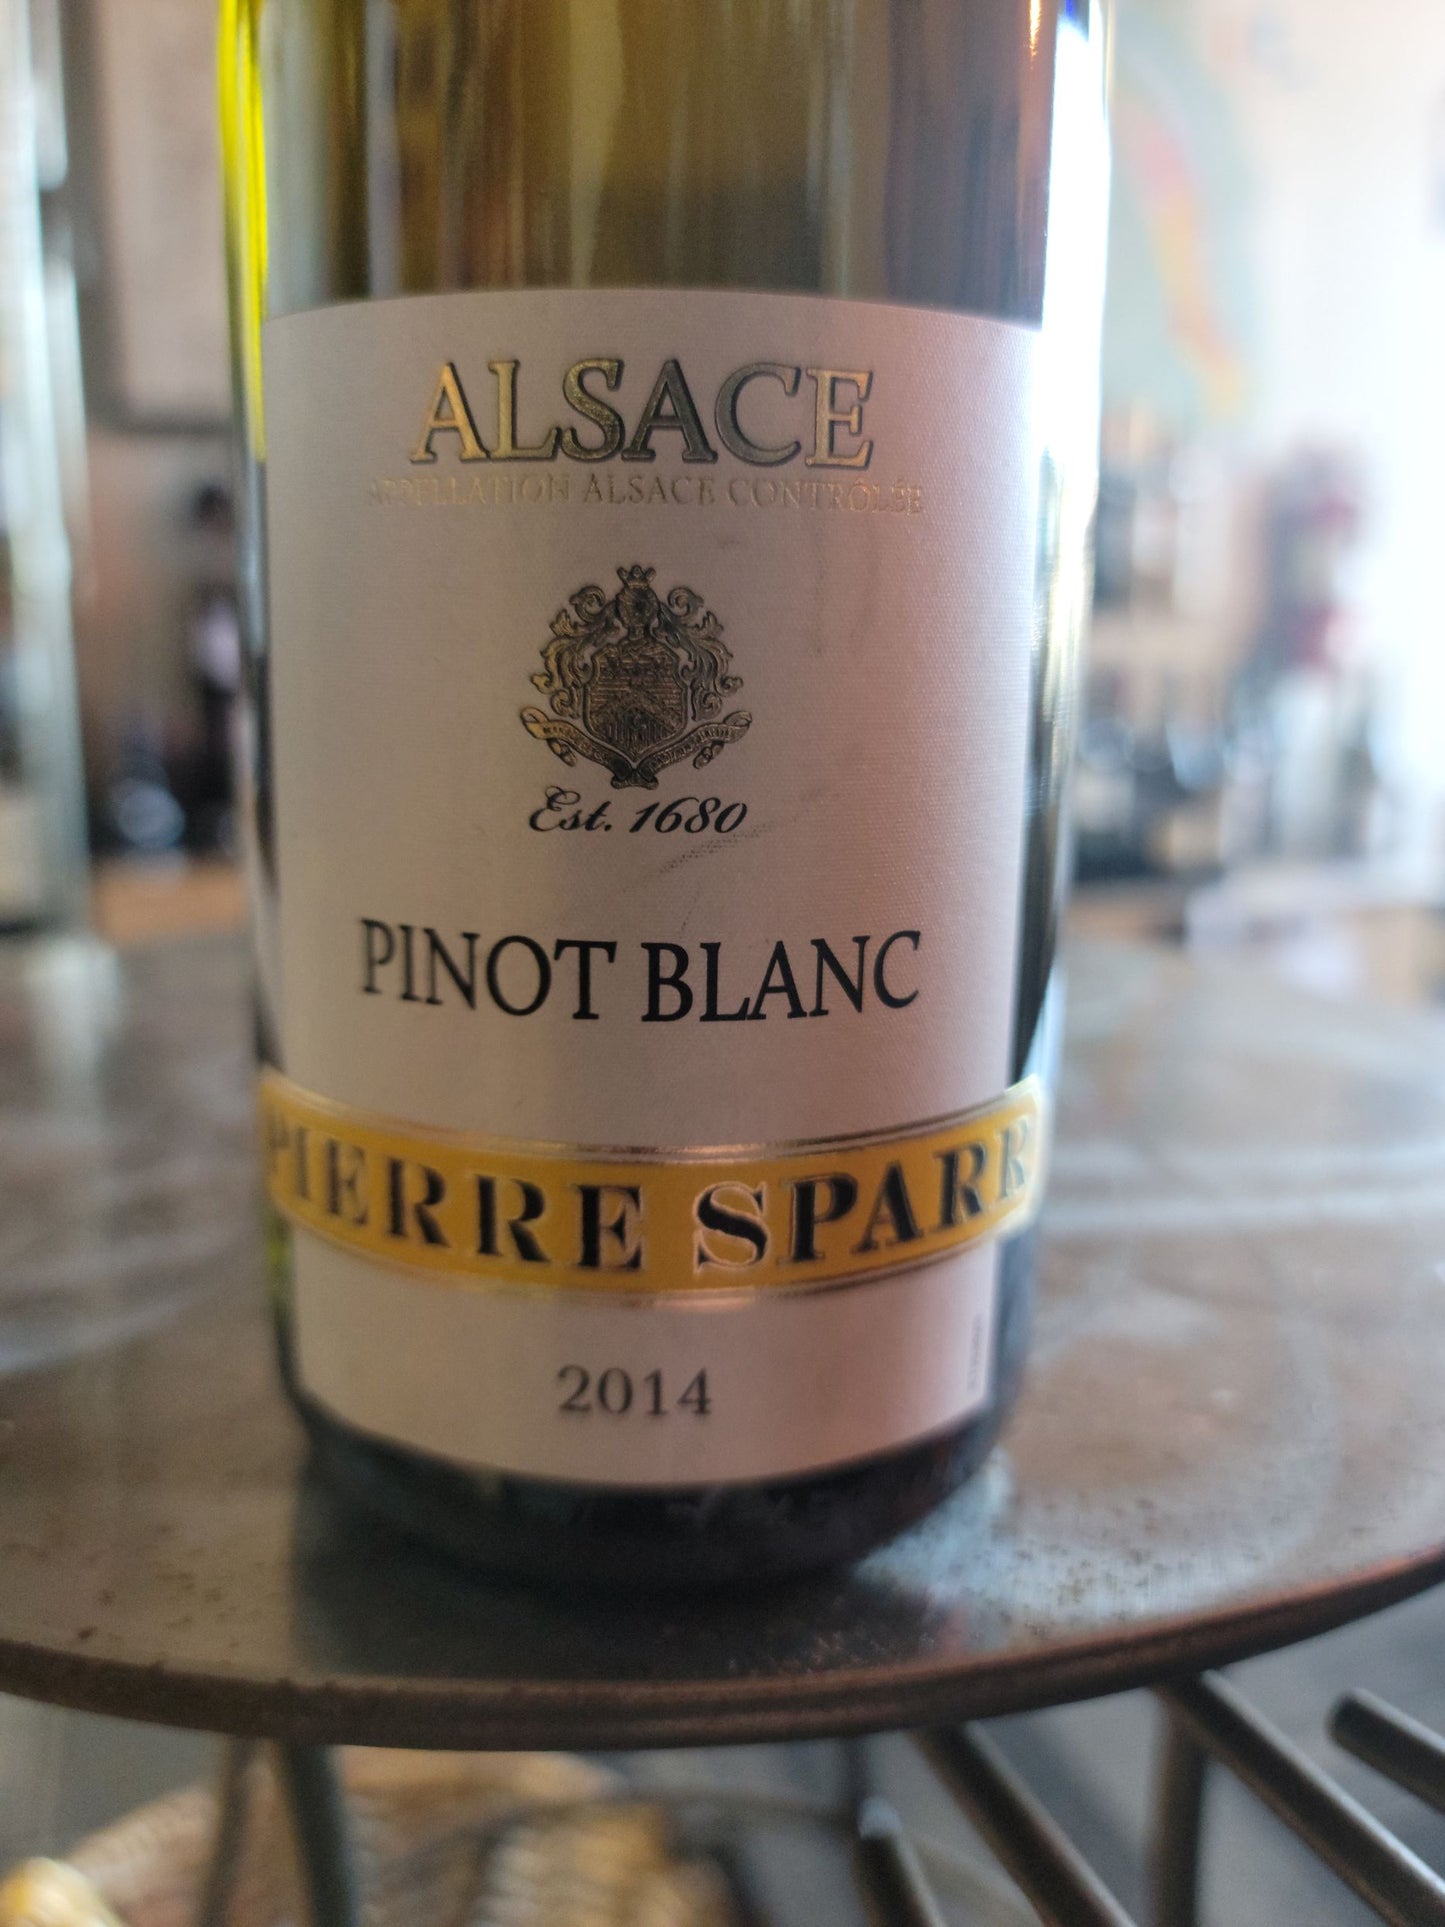 PIERRE SPARR 2014 Pinot Blanc (Alsace, France)